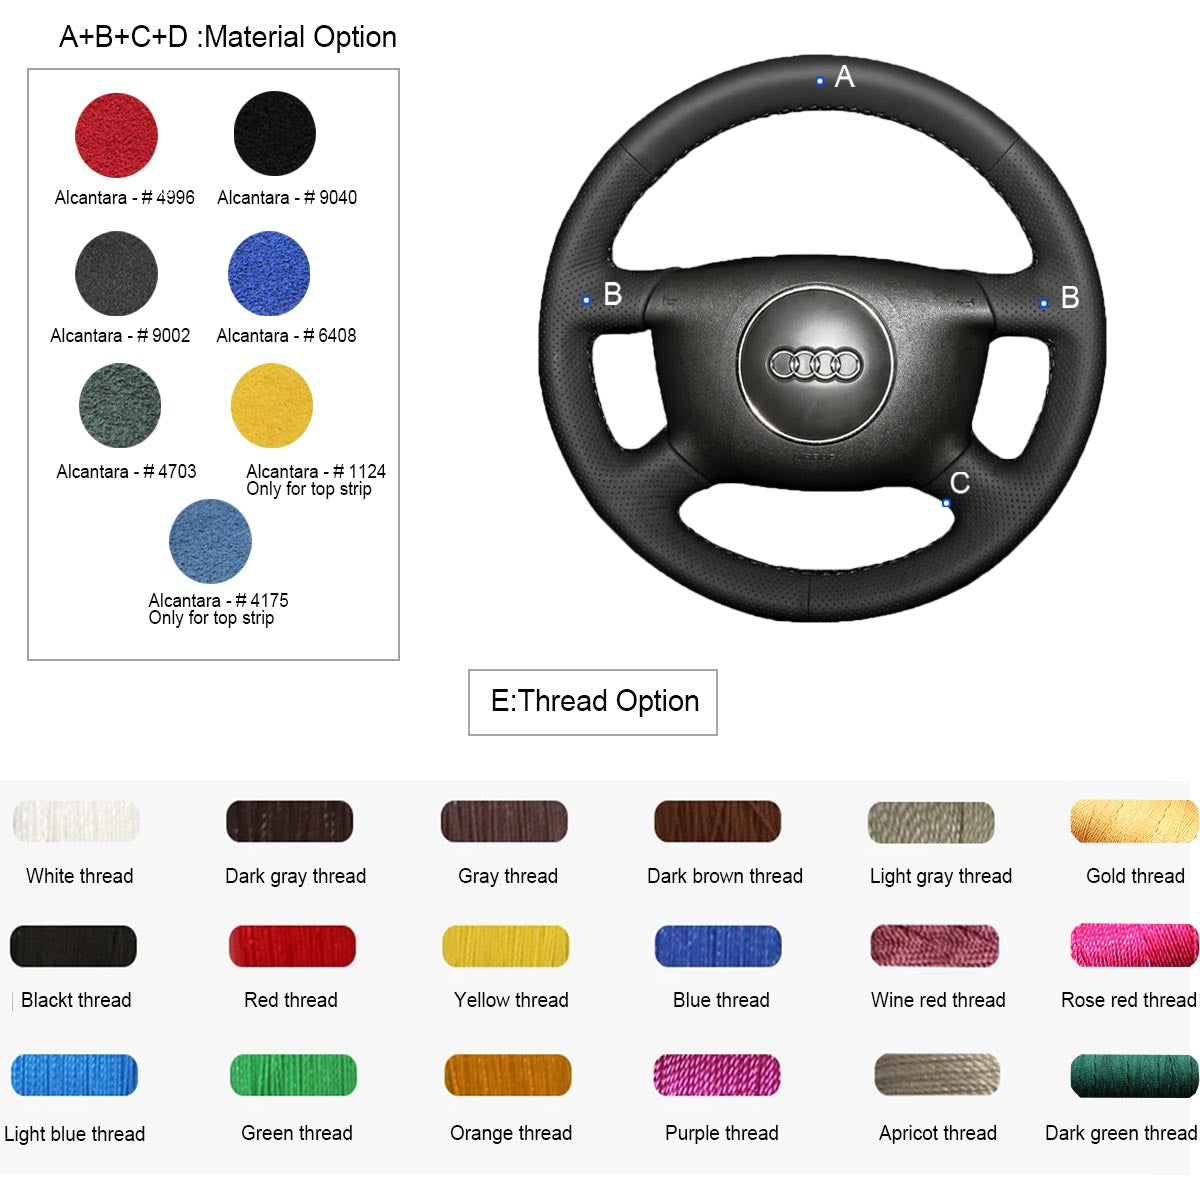 LQTENLEO Leather Suede Hand-stitched Car Steering Wheel Cover for Audi A4 1998 A6 /A8 A8 L /Allroad - LQTENLEO Official Store